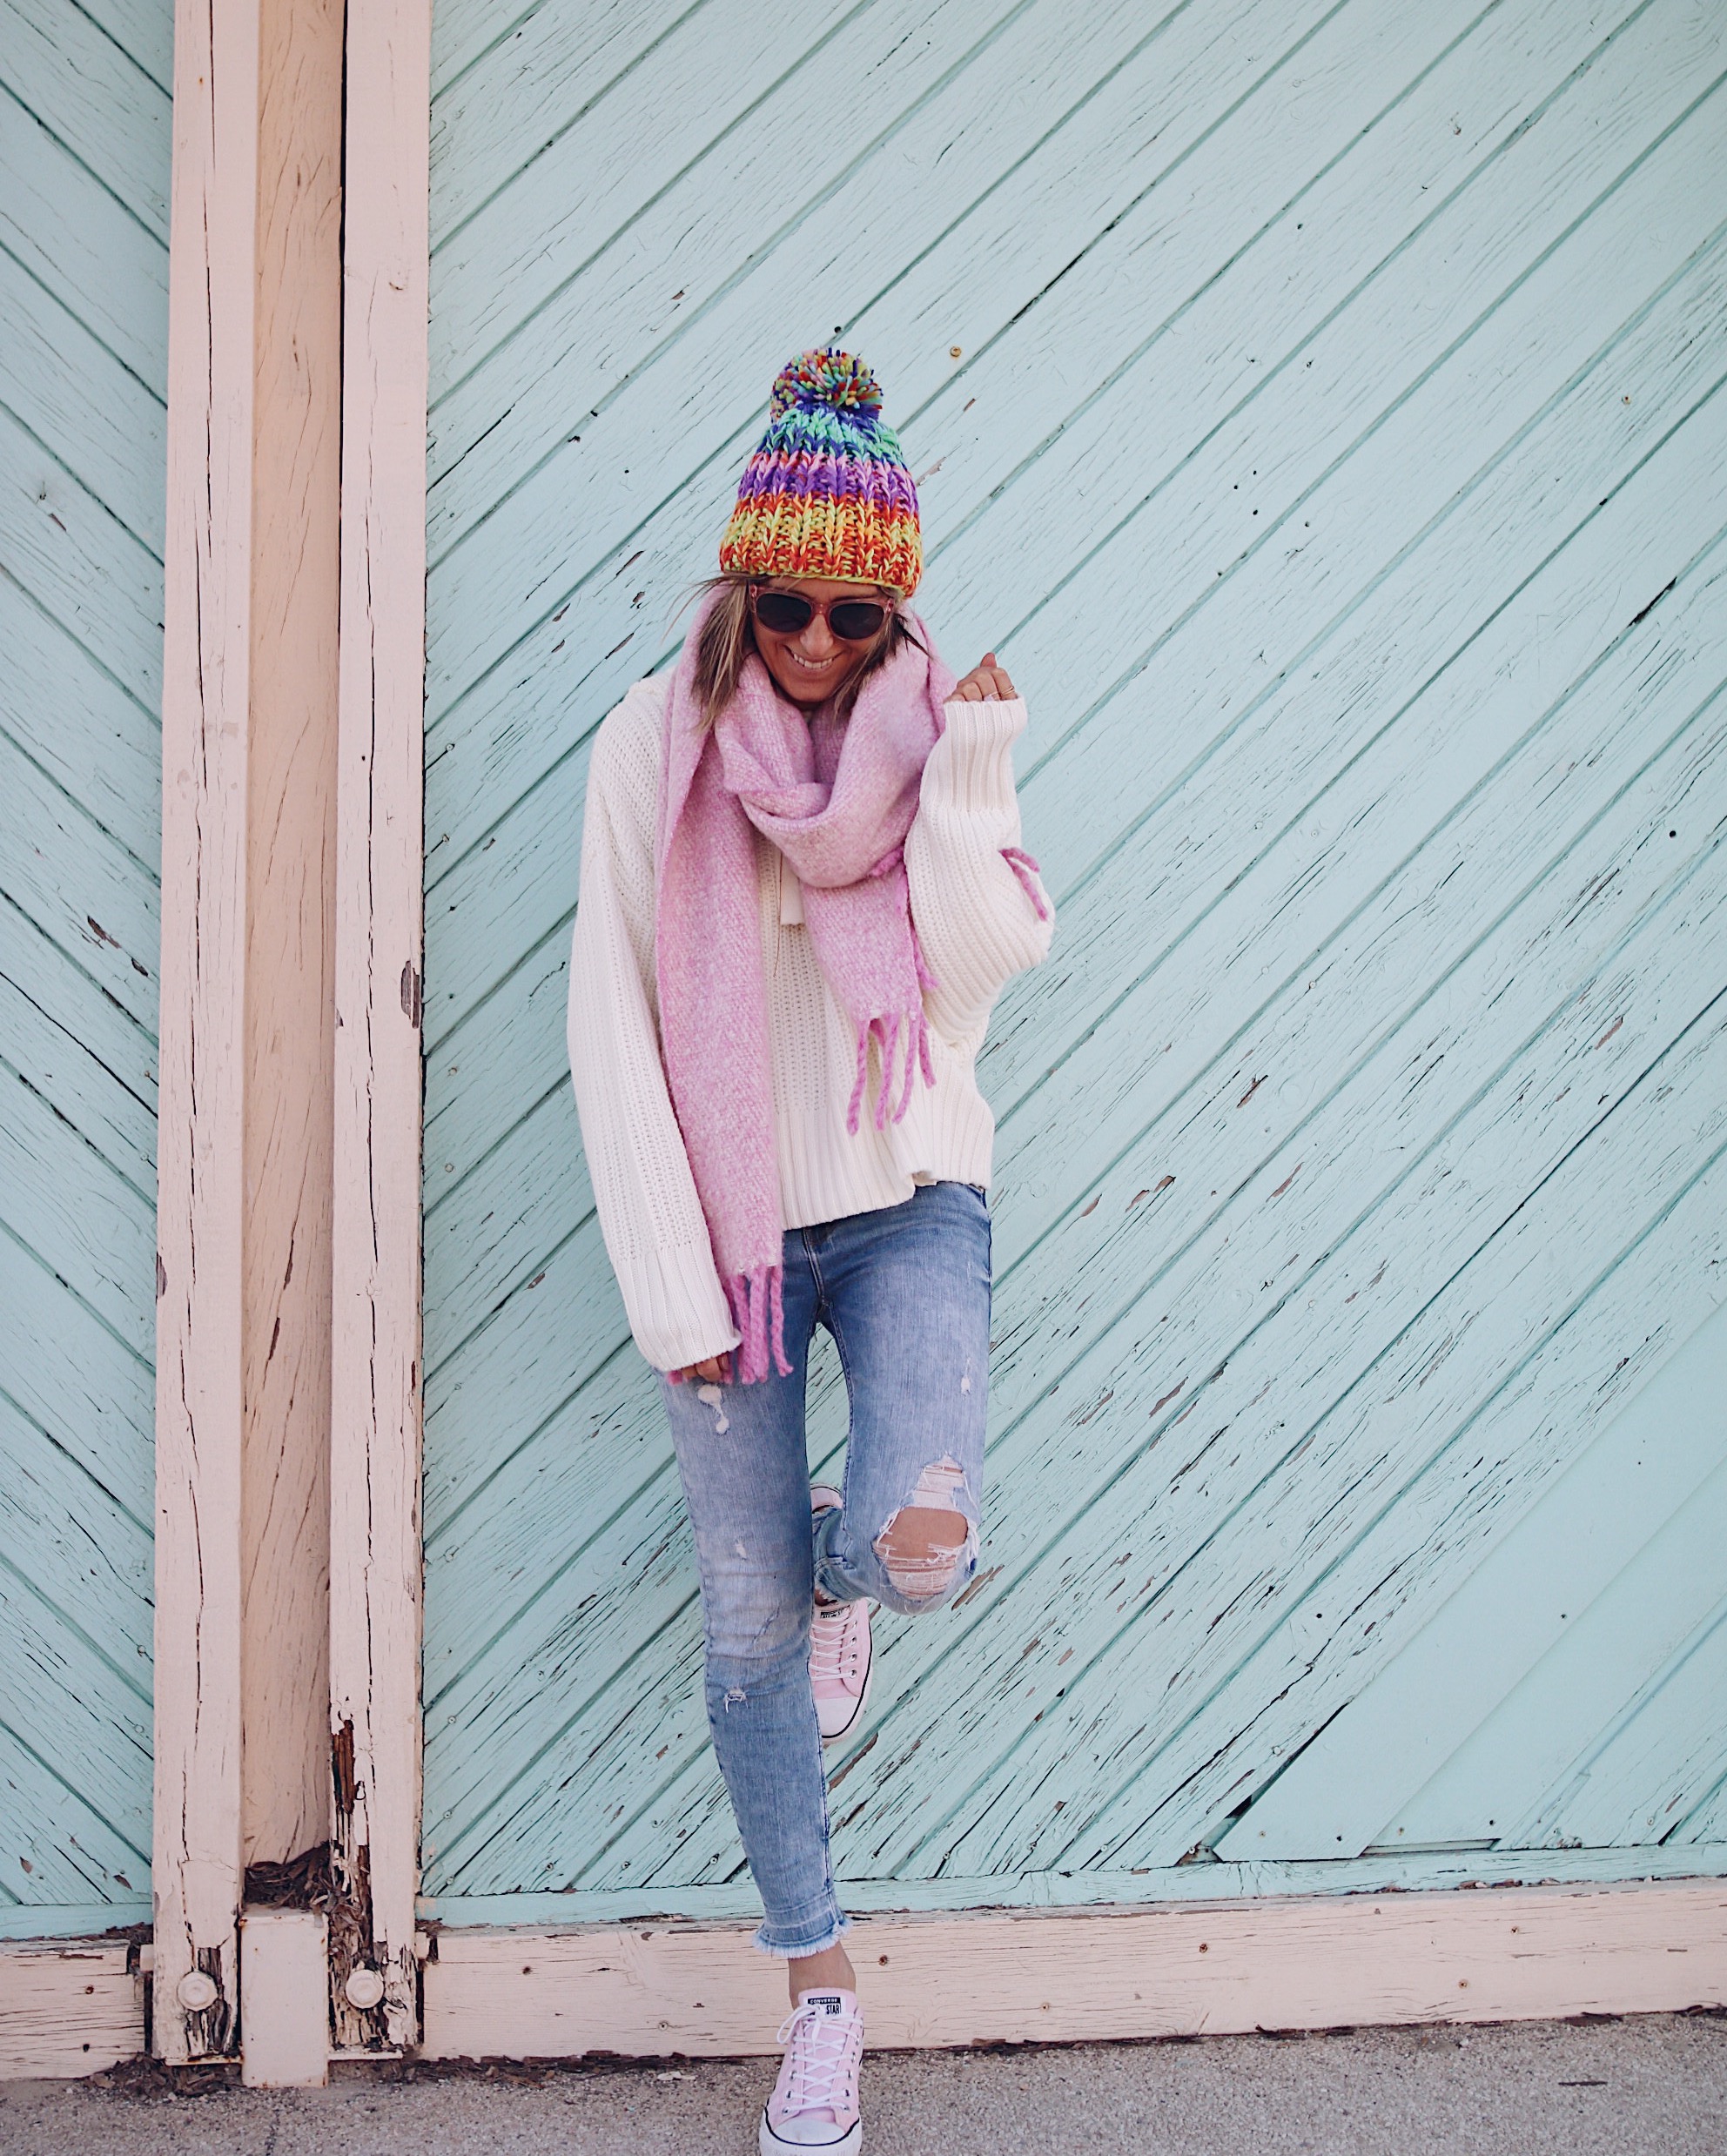 COLORFUL - Chon & HON - www.chonandchon.com - colorful beannie and denim, casula style, fashib lobbe, pink scarf, grosse écharpe rose laine oversize